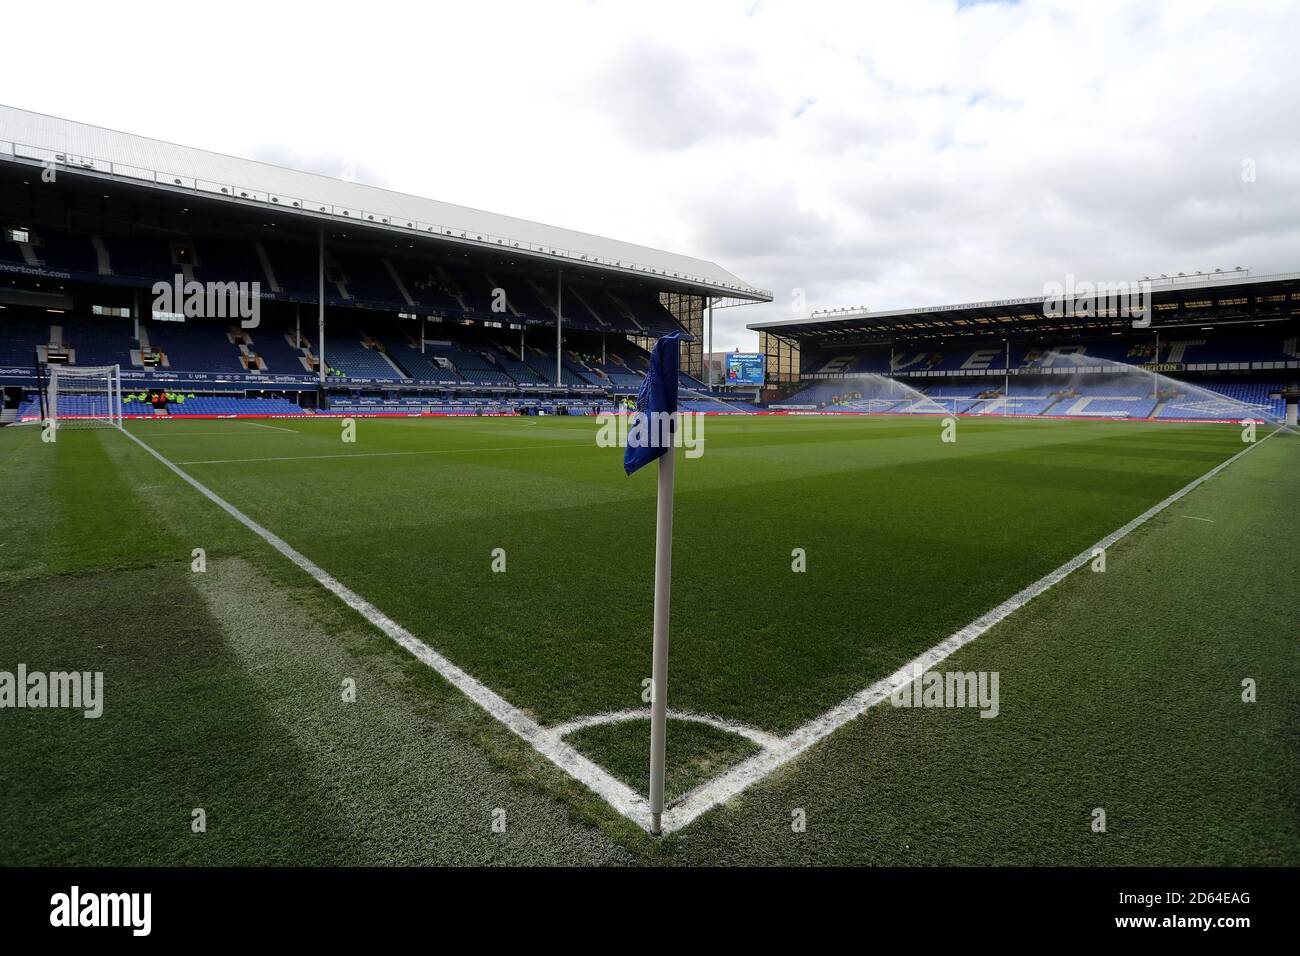 A view of Goodison Park before the game Stock Photo